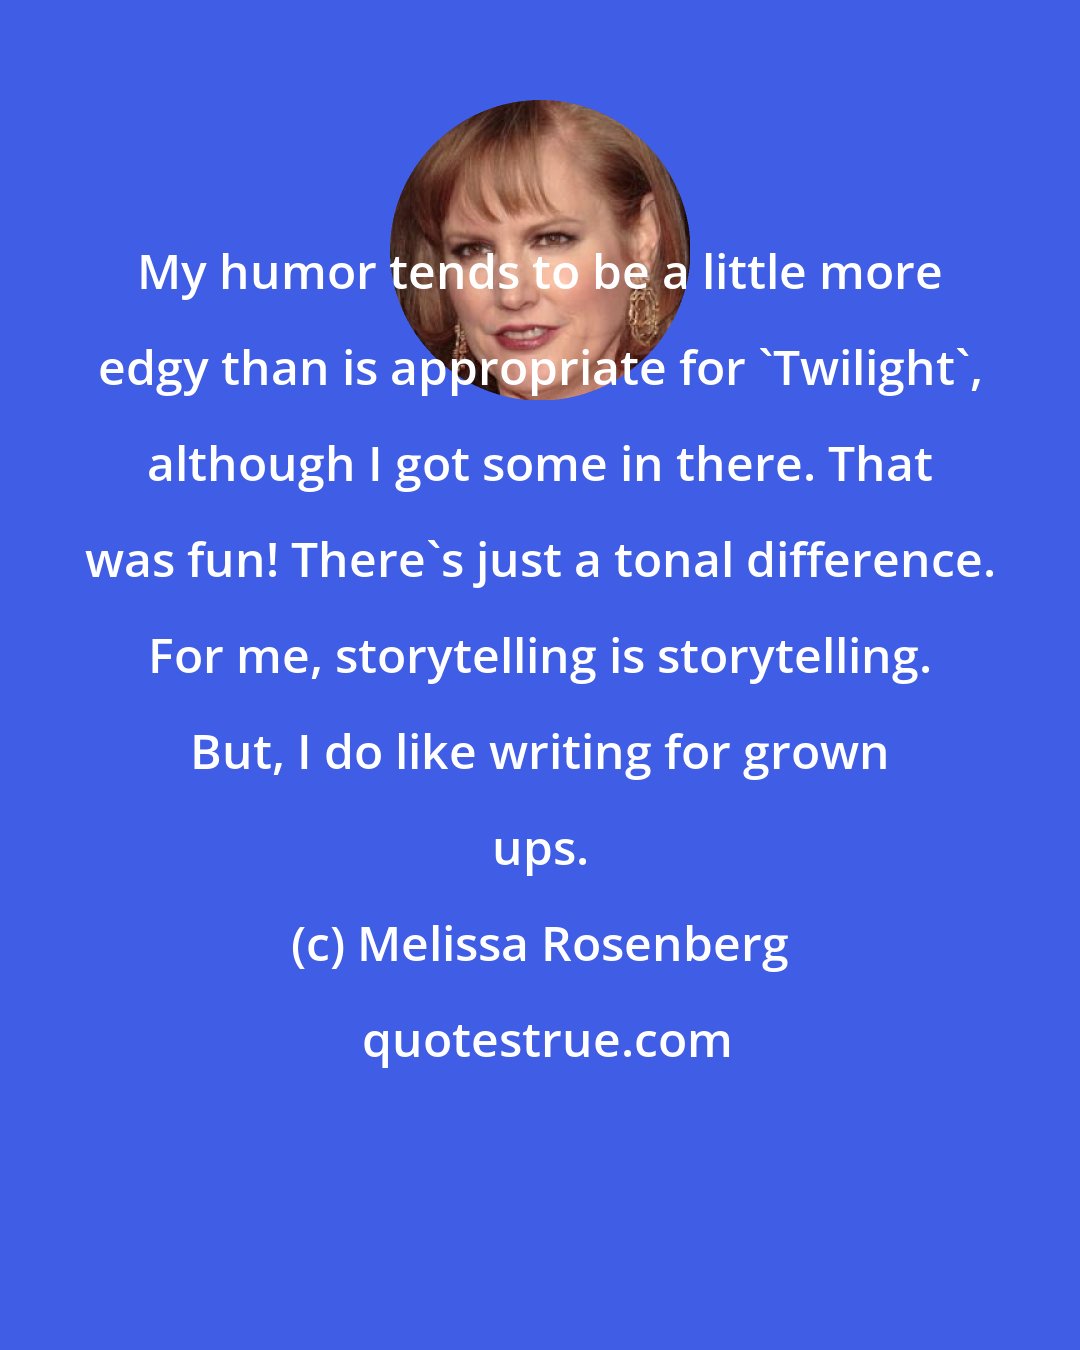 Melissa Rosenberg: My humor tends to be a little more edgy than is appropriate for 'Twilight', although I got some in there. That was fun! There's just a tonal difference. For me, storytelling is storytelling. But, I do like writing for grown ups.